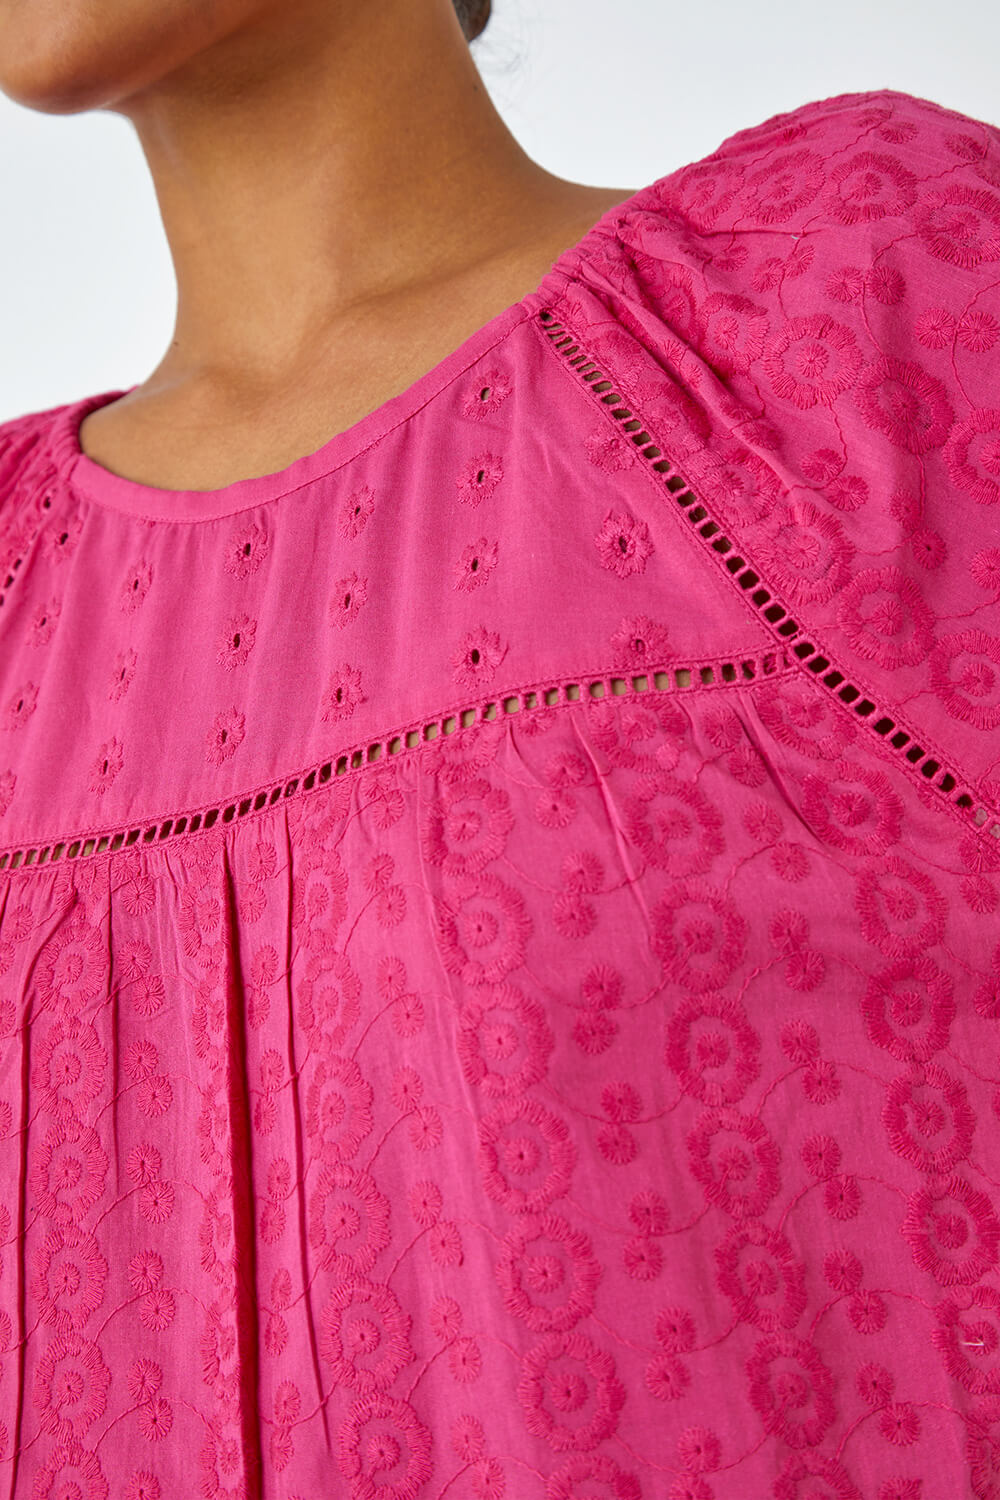 PINK Broderie Puff Sleeve Cotton Top, Image 5 of 5